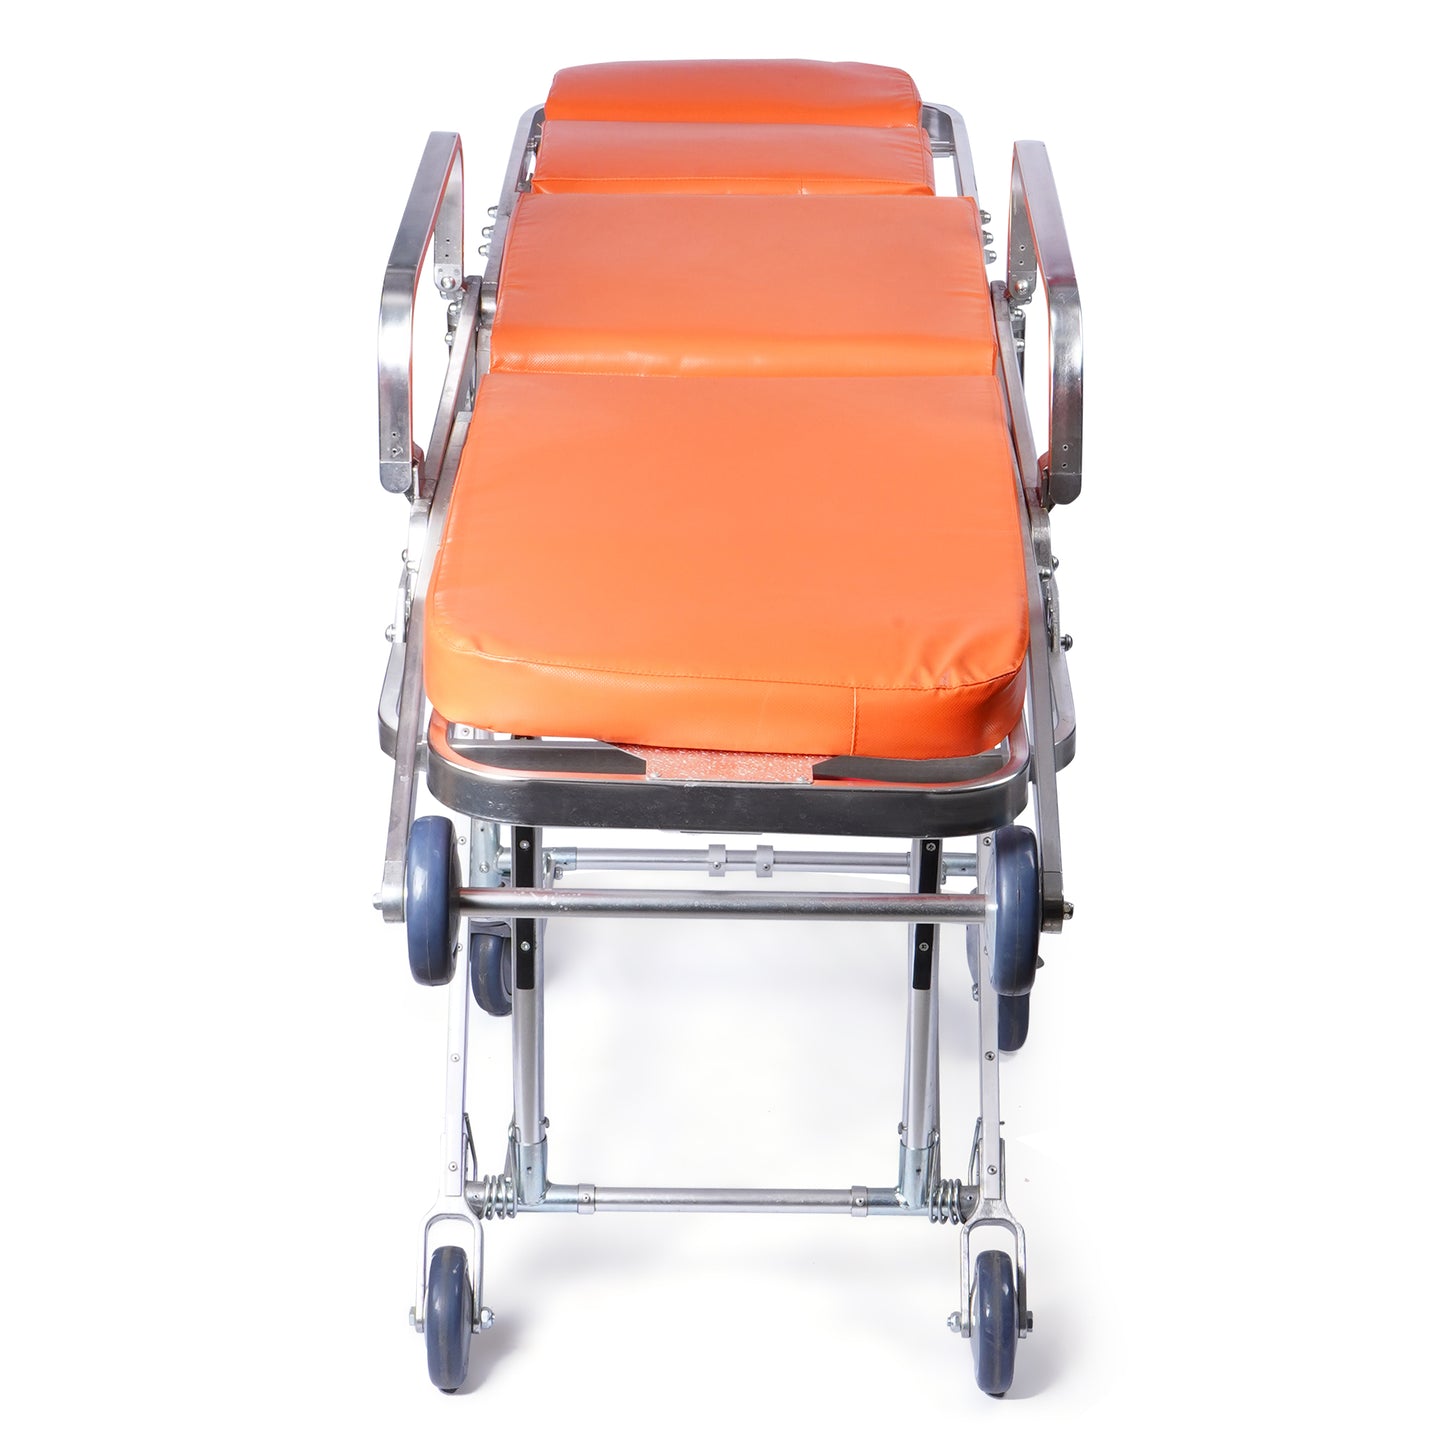 ARREX STR 20 PRO AMBULANCE STRETCHER: FOLDS INTO CHAIR POSITION, HEAVY-DUTY CASTORS WITH PEDAL BRAKES, COLLAPSIBLE LEGS, SAFETY AND VERSATILITY